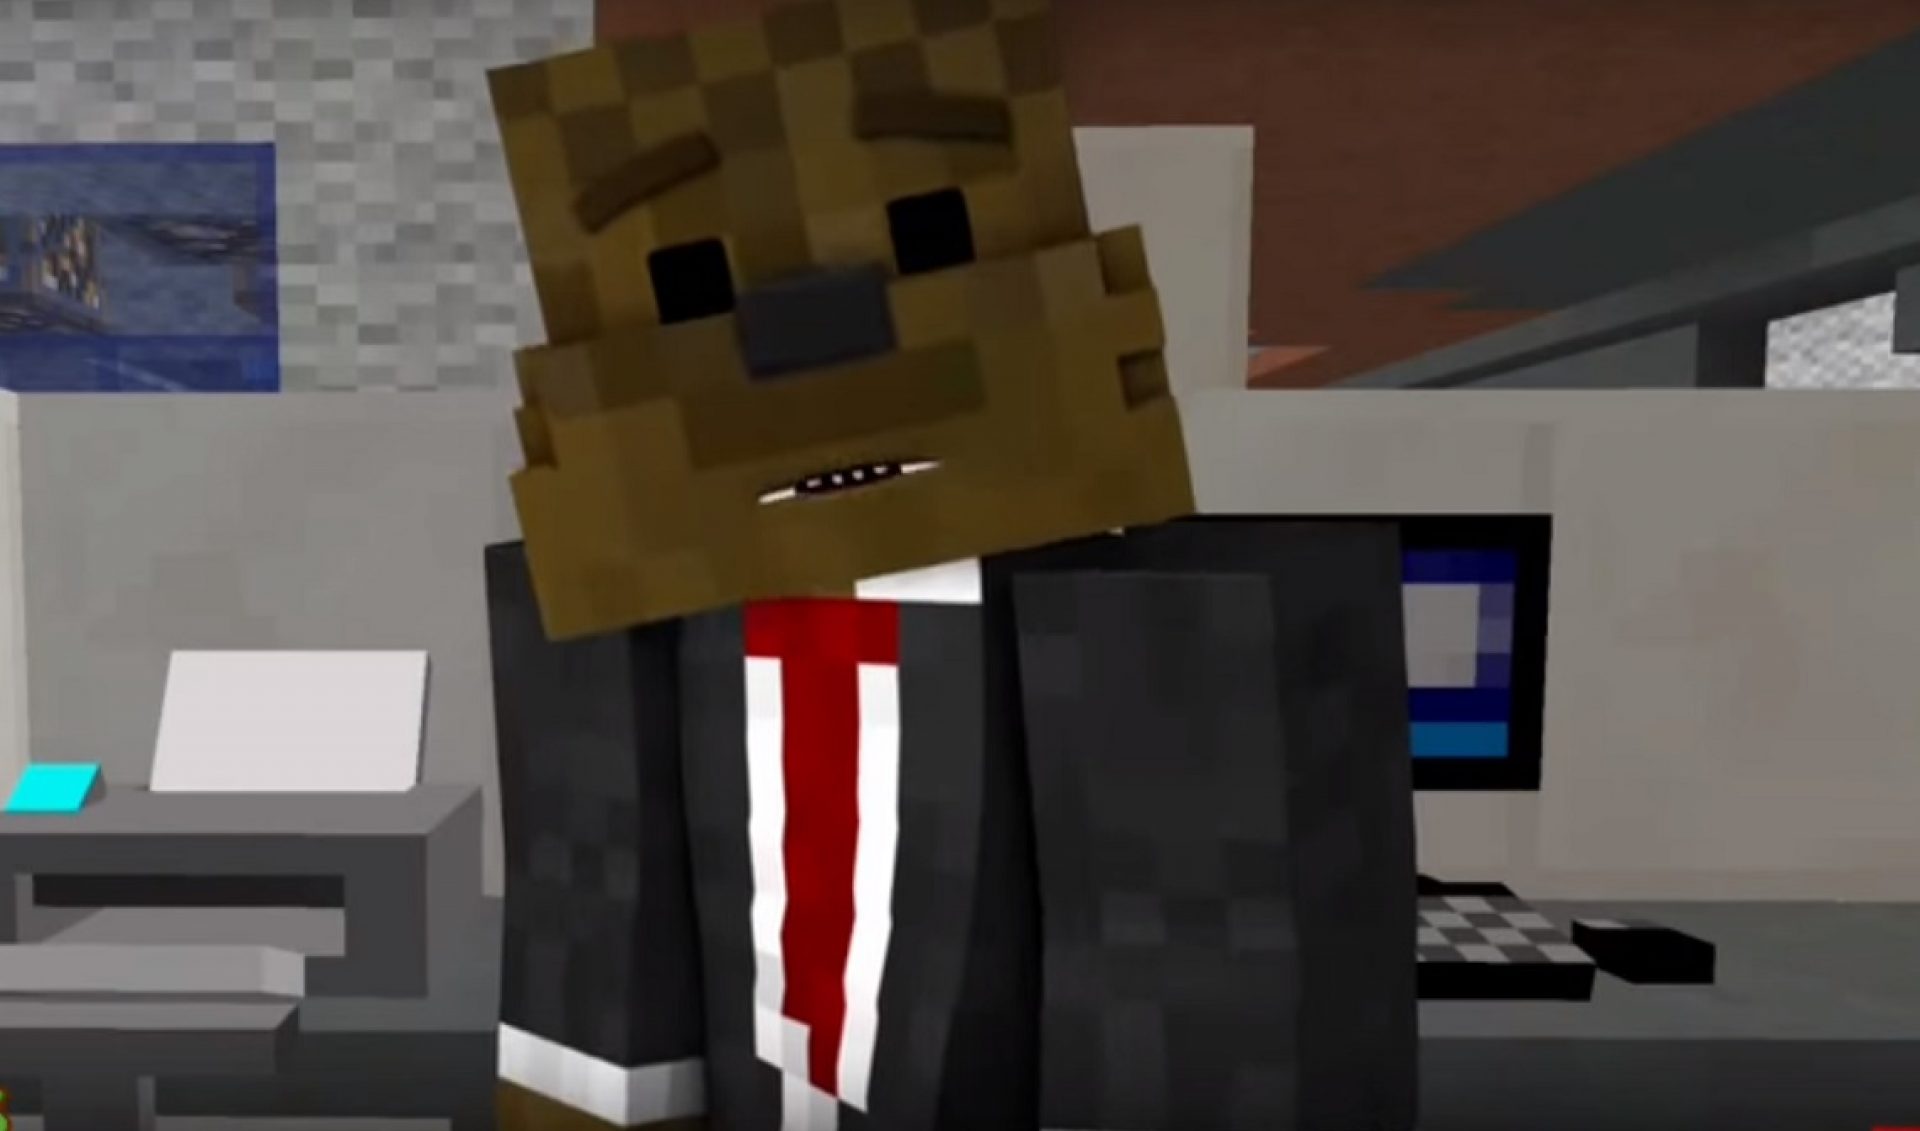 Machinima And Gaming Star JeromeASF Team Up For Animated ‘Minecraft’-Based Series